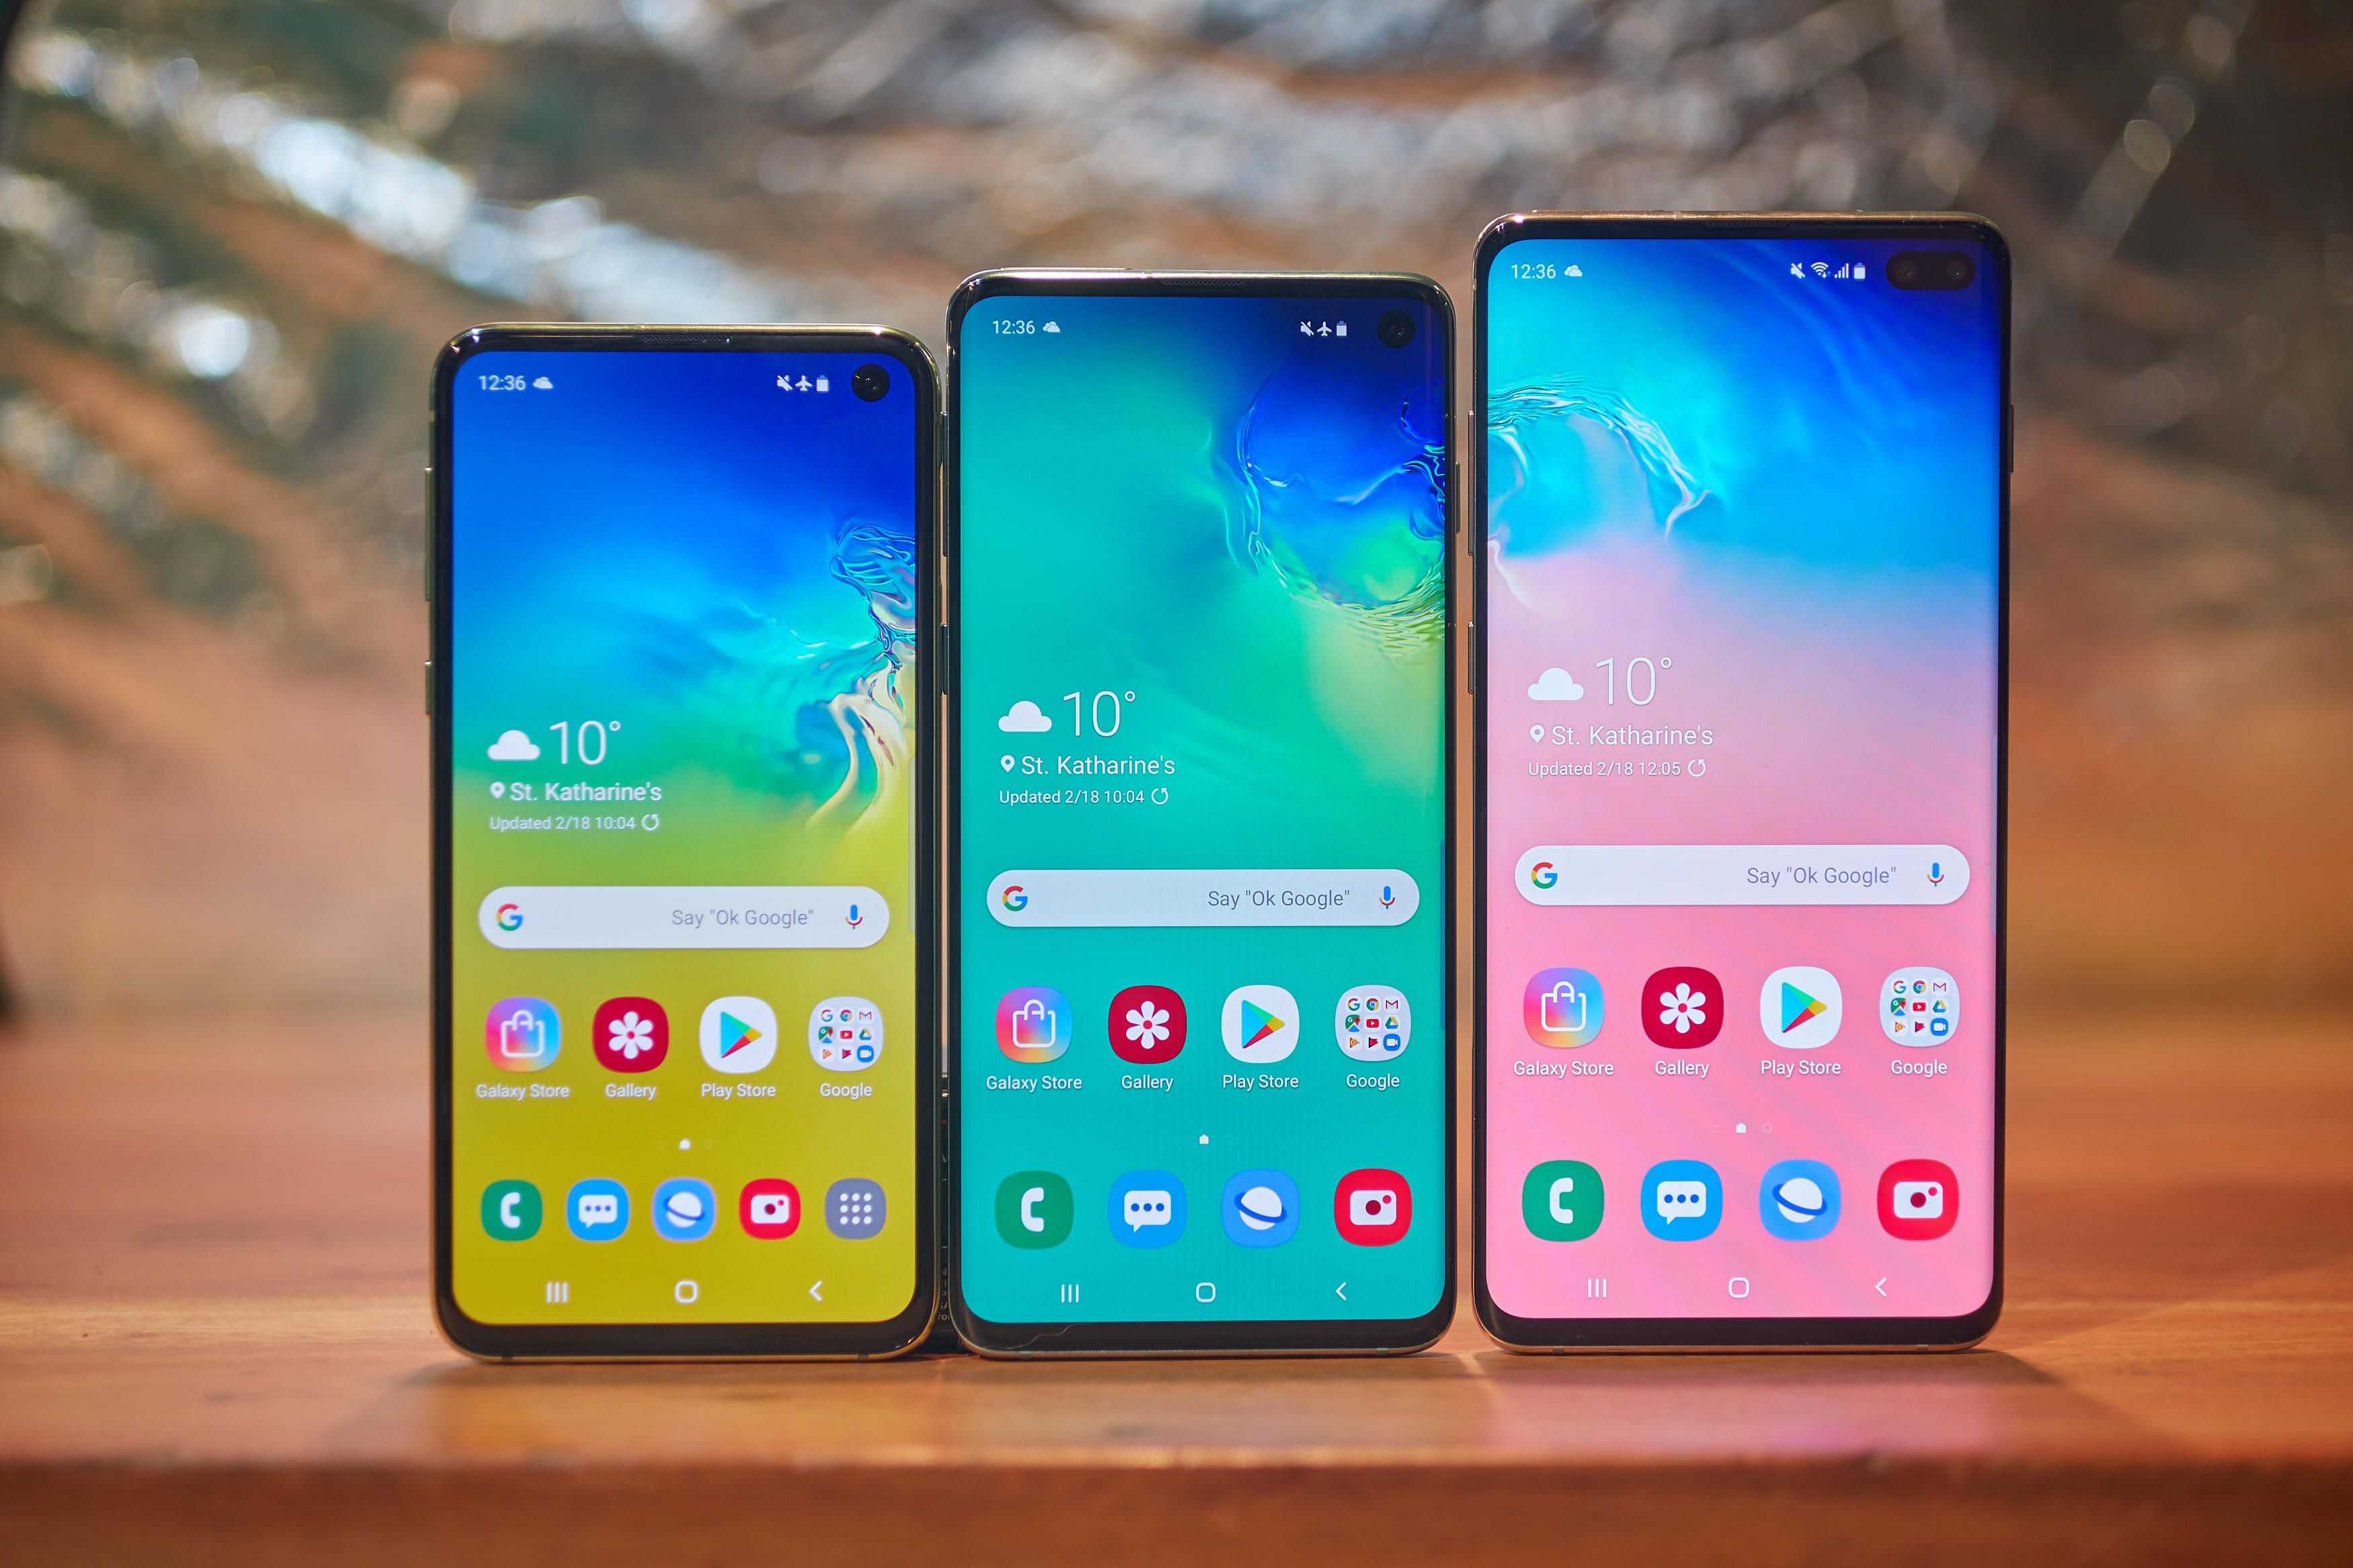 Where to Pre Order Samsung Galaxy S10 and Samsung Galaxy S10+ in US